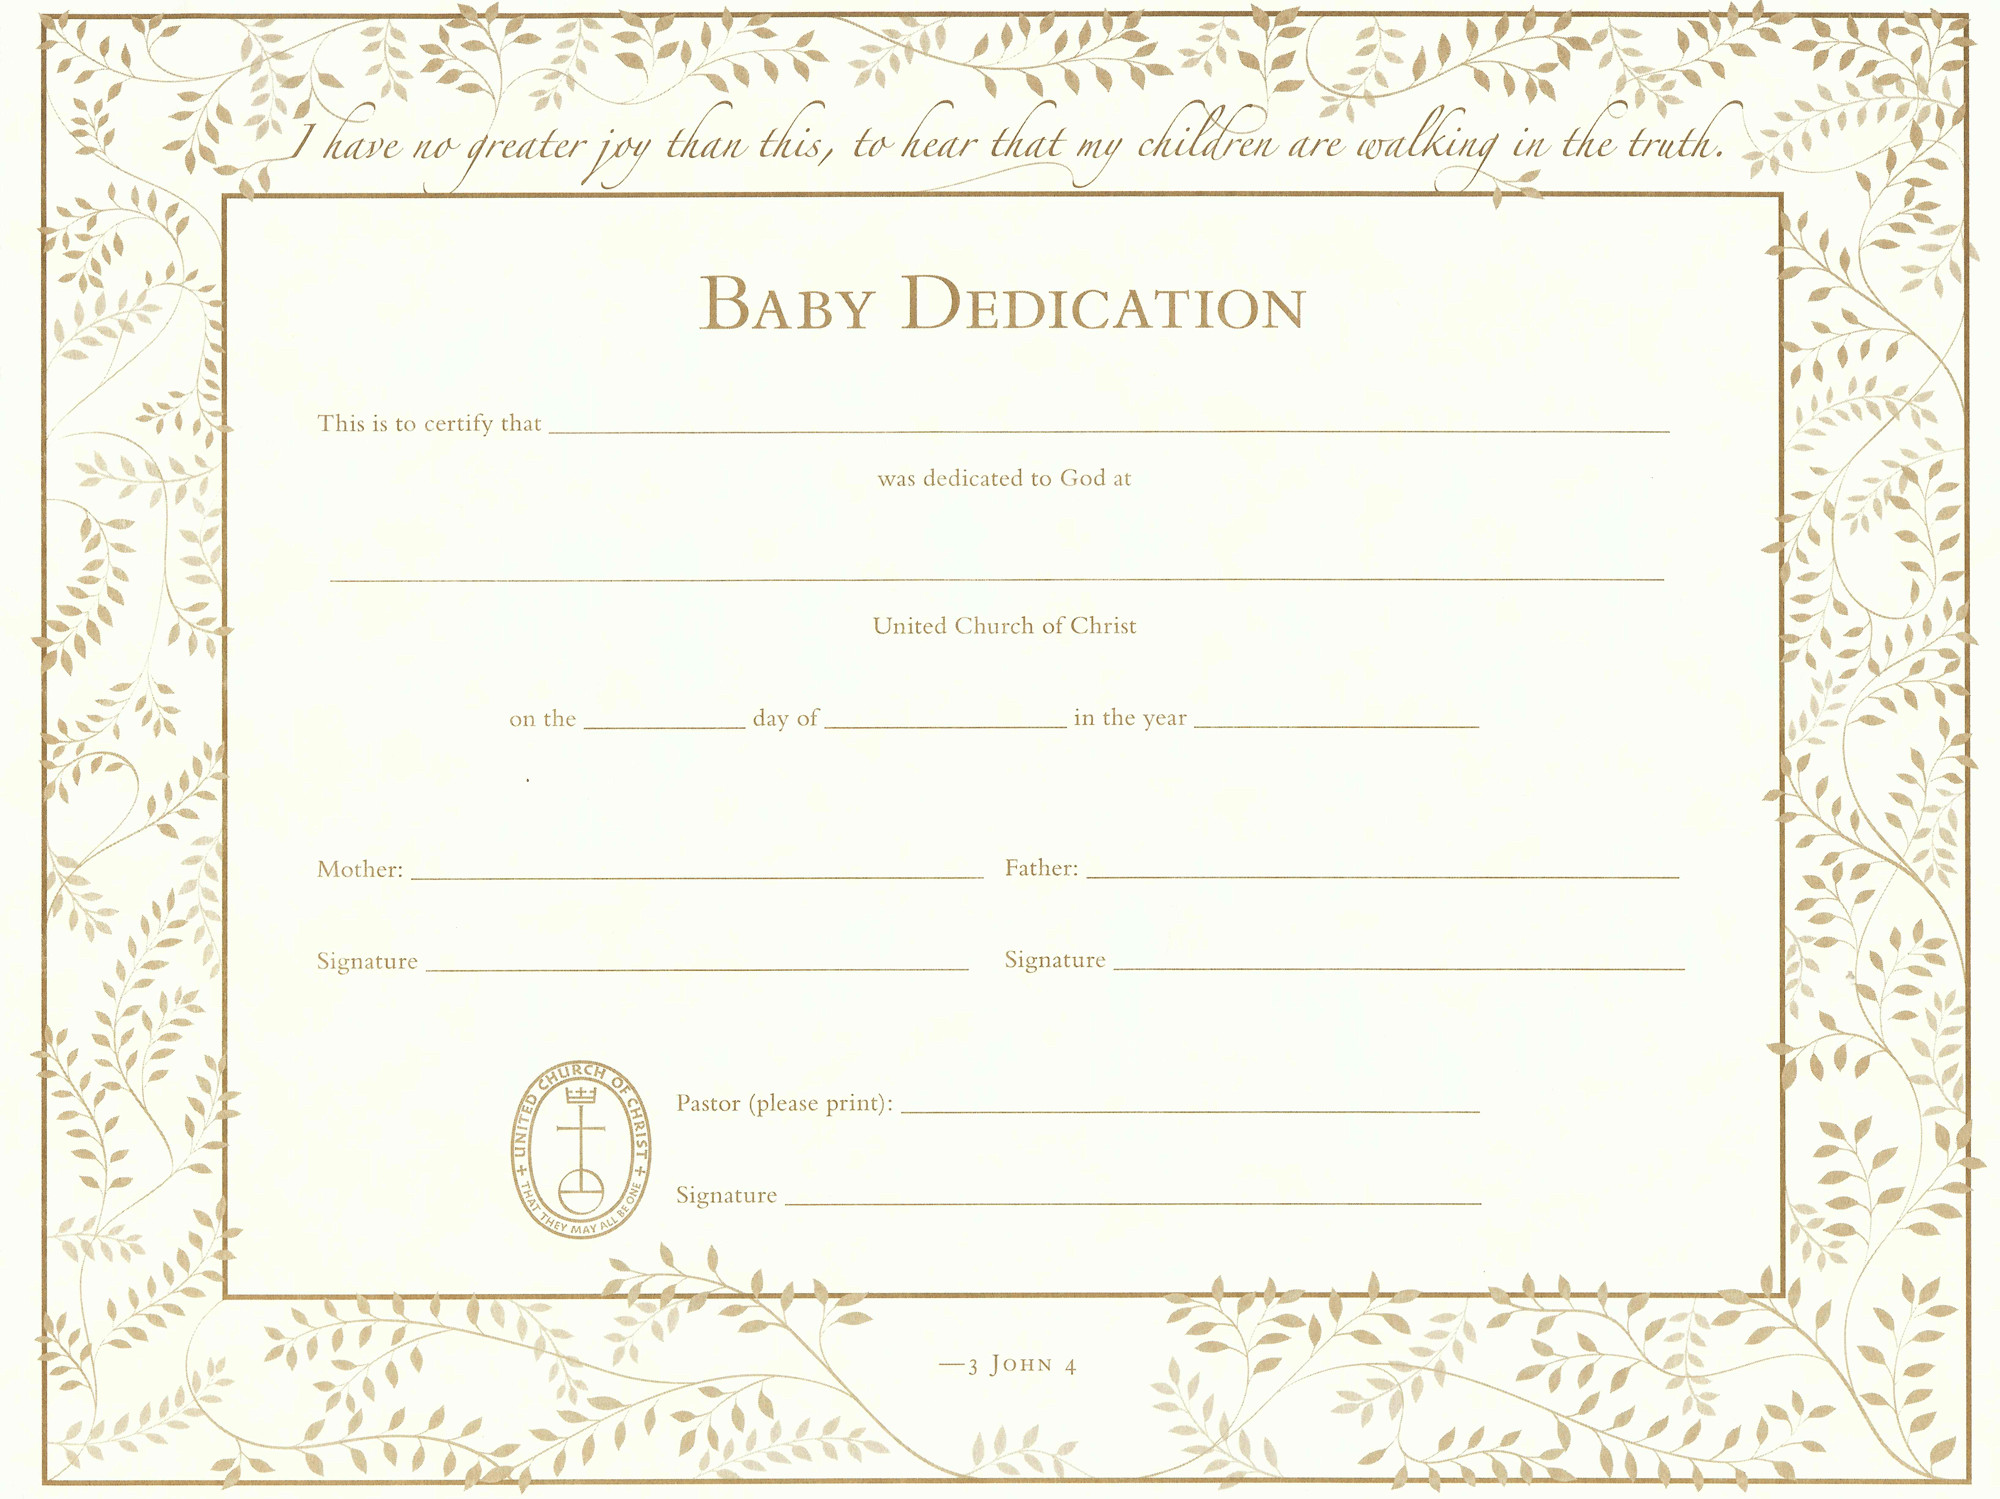 Baby Dedication Certificate Template Baby Dedication Certificate Cake Ideas and Designs